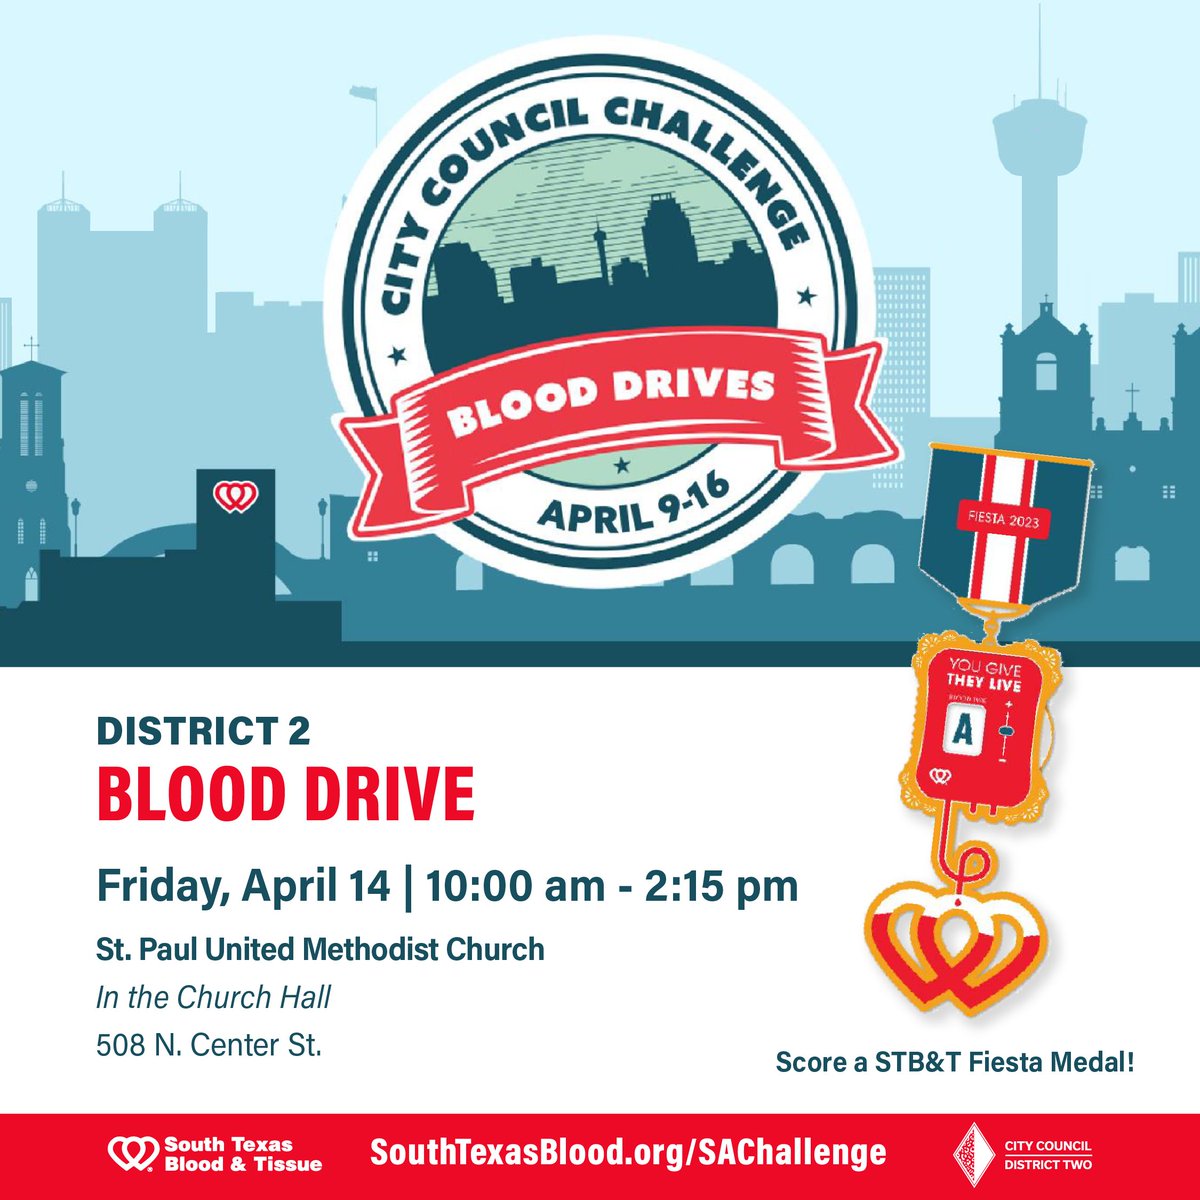 There is still time to sign up! SA Challenge blood drives are normally scheduled to meet demand during times of the year when the blood supply dips. To donate please make an appointment at the following link: SouthTexasBlood.org/SAChallenge or call 210-731-5590 ❤️🖤